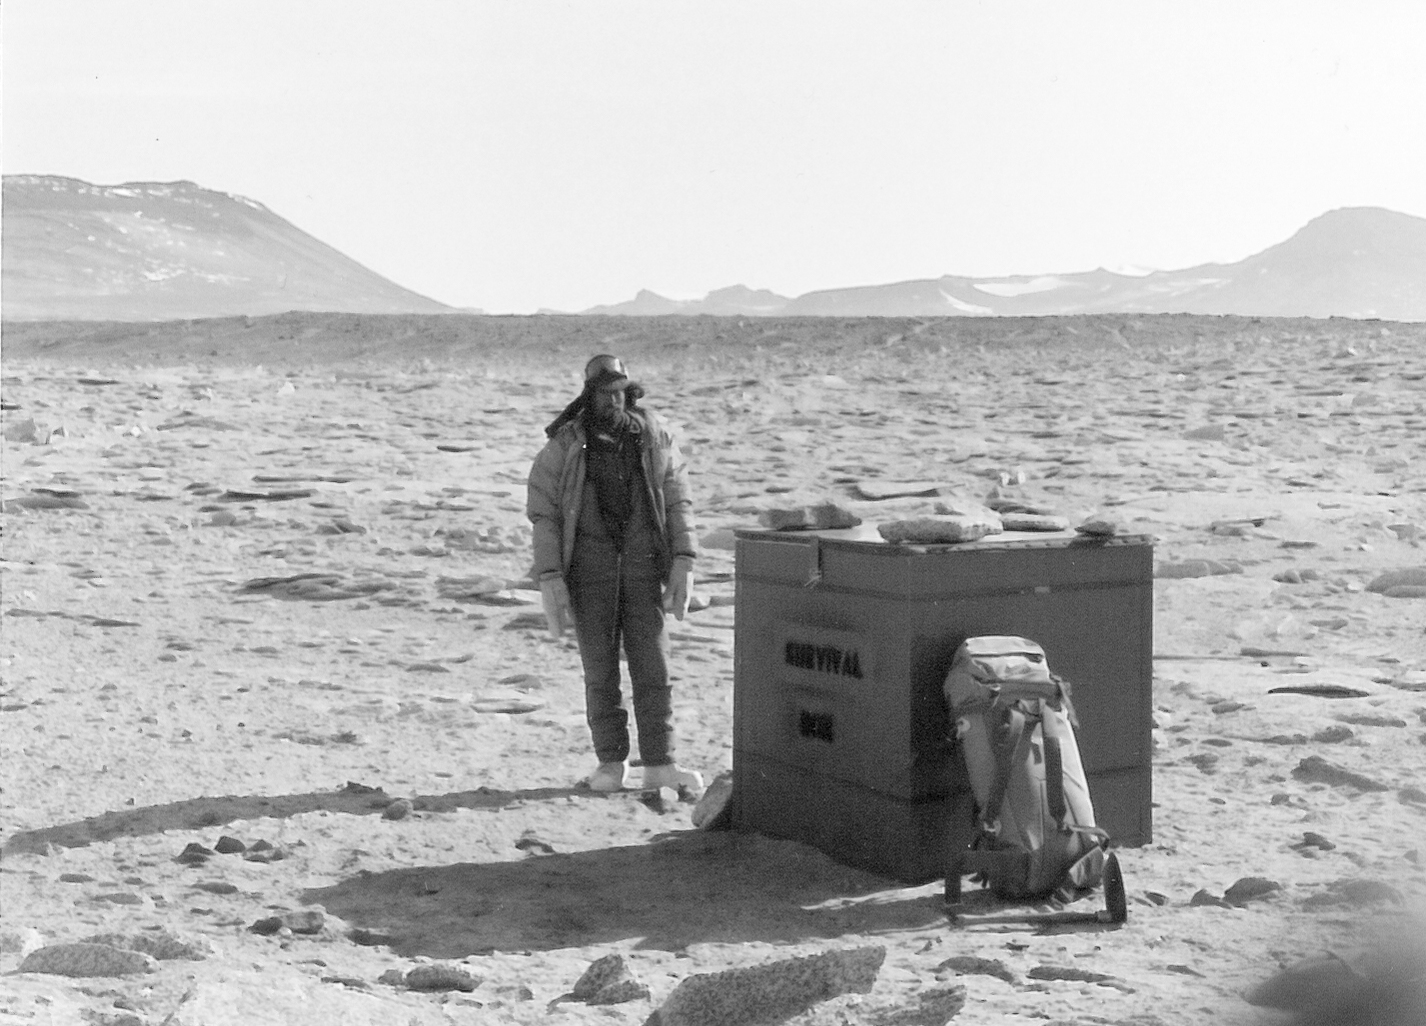 A man standing next to a box on a wide open space.